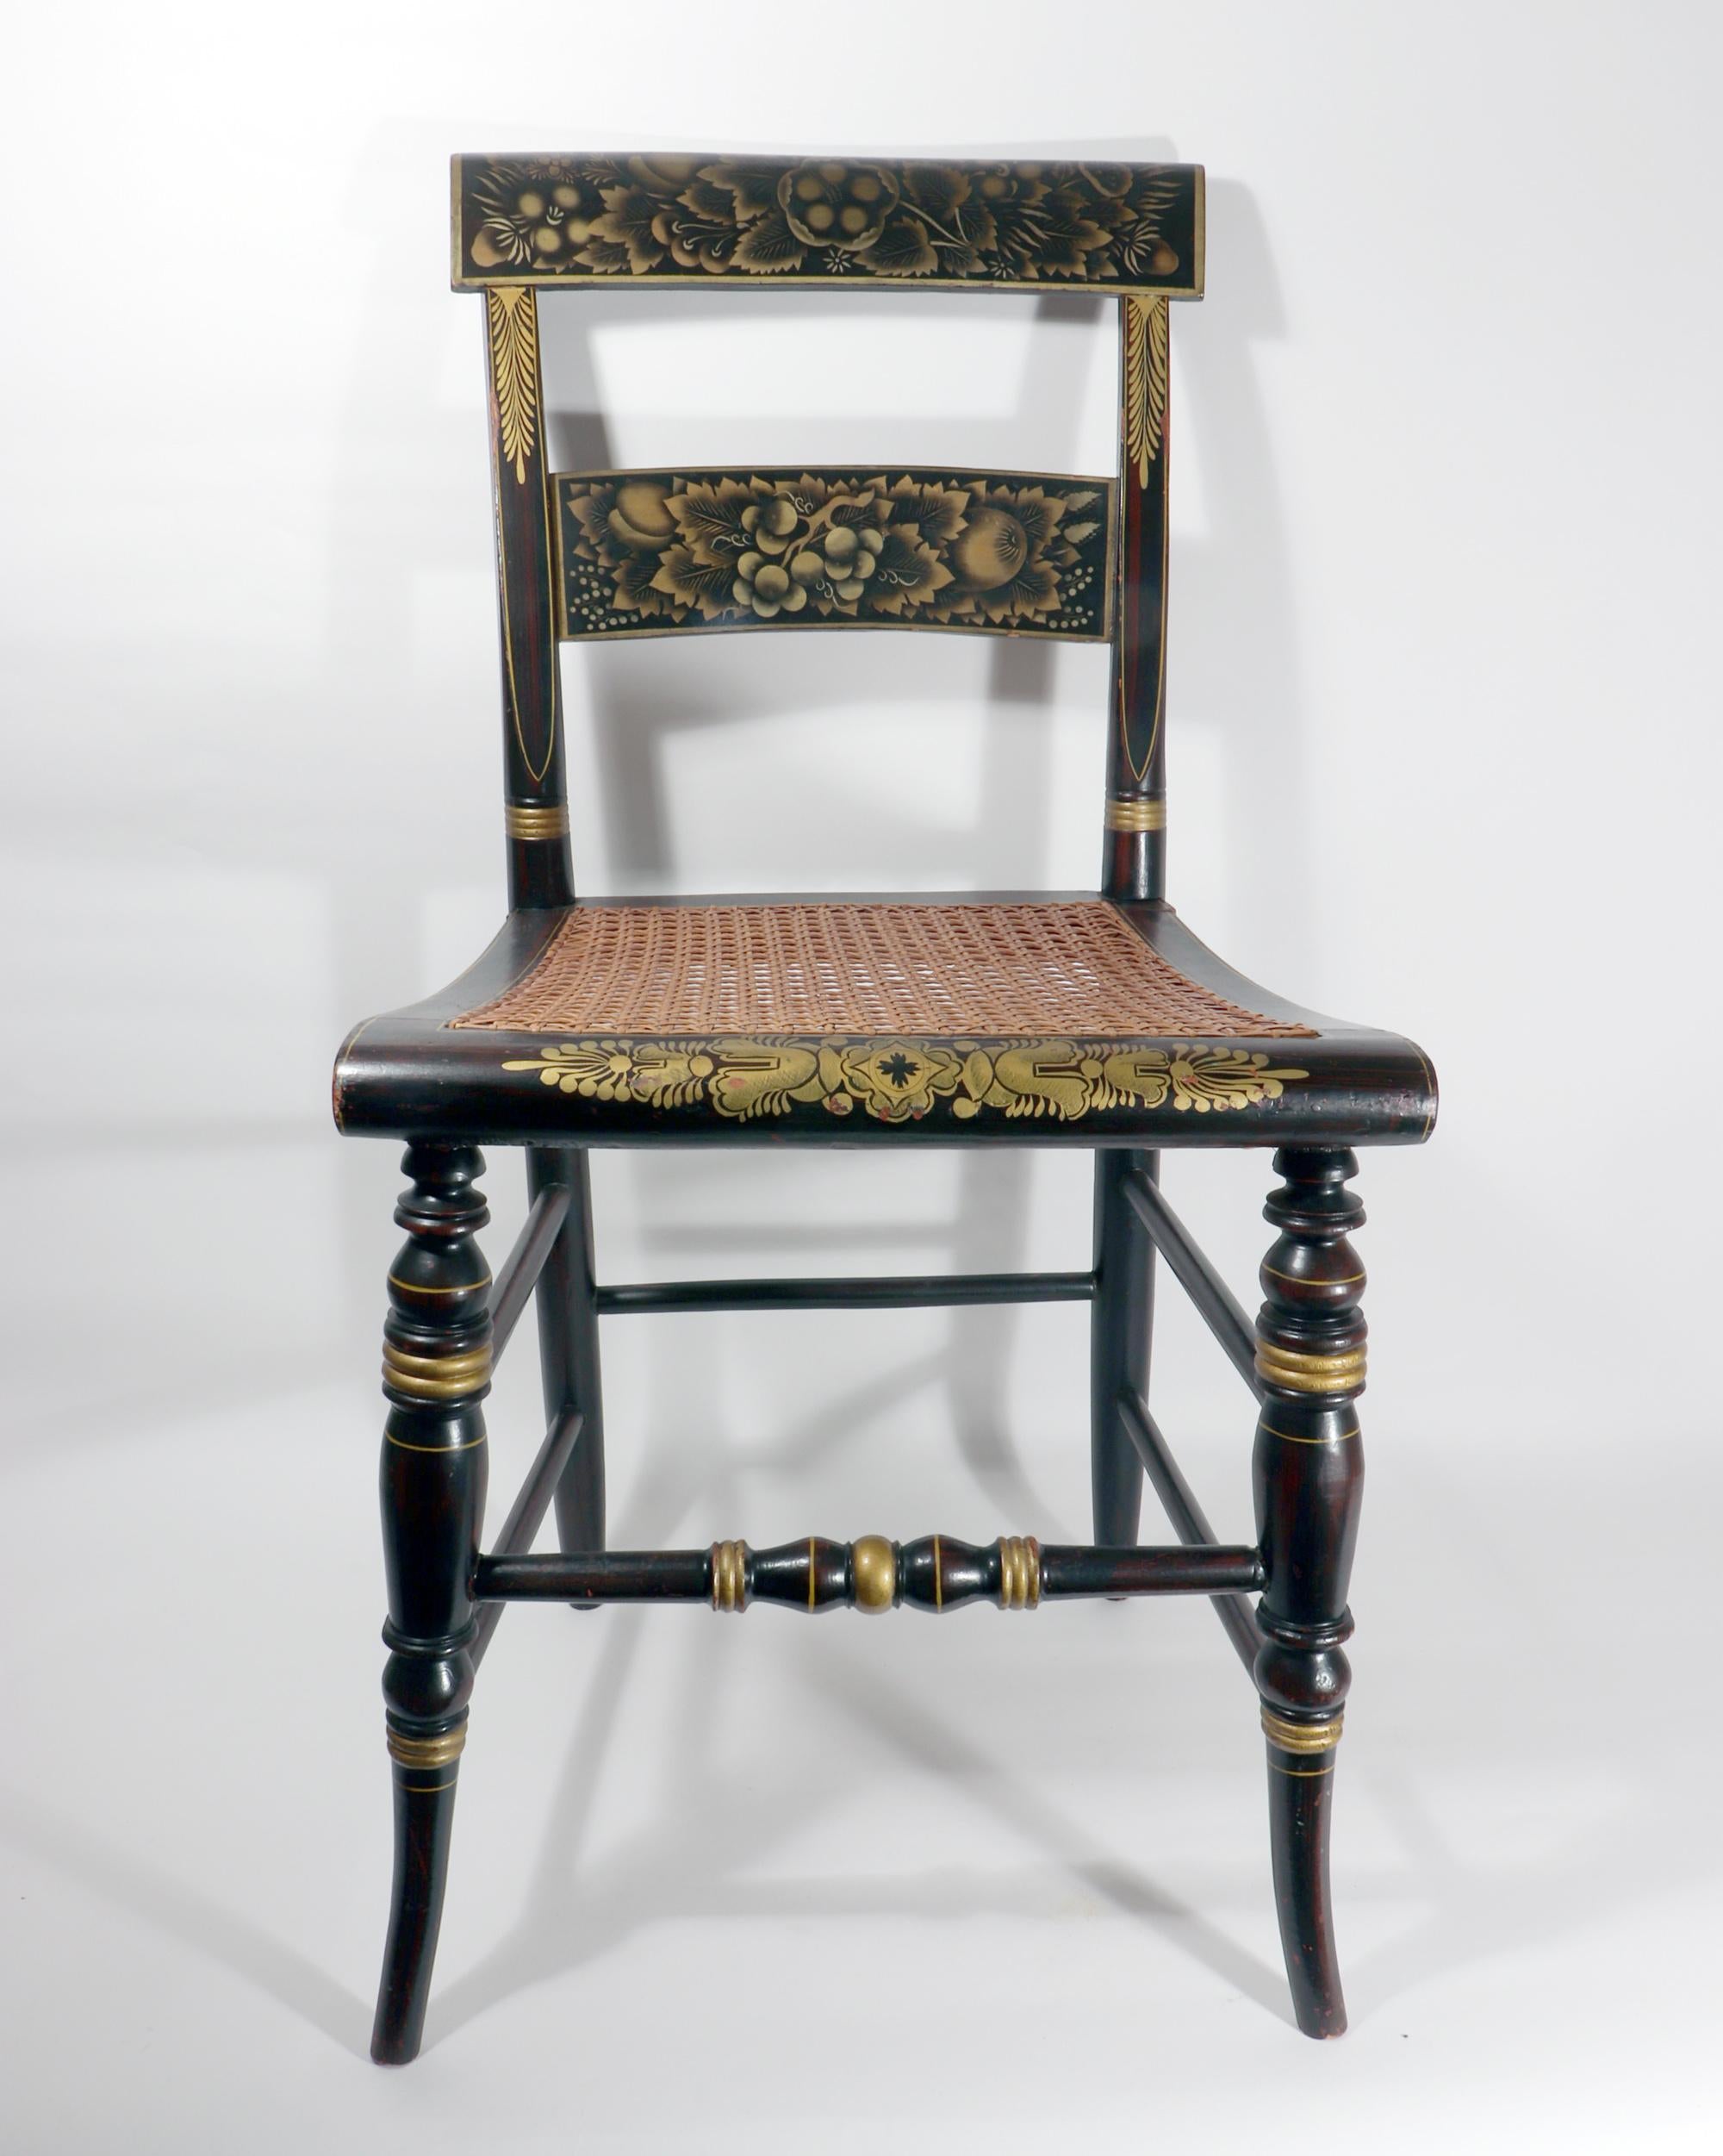 New England Hitchcock Chairs Rosewood Painted & Stenciled Flowering Plants For Sale 1